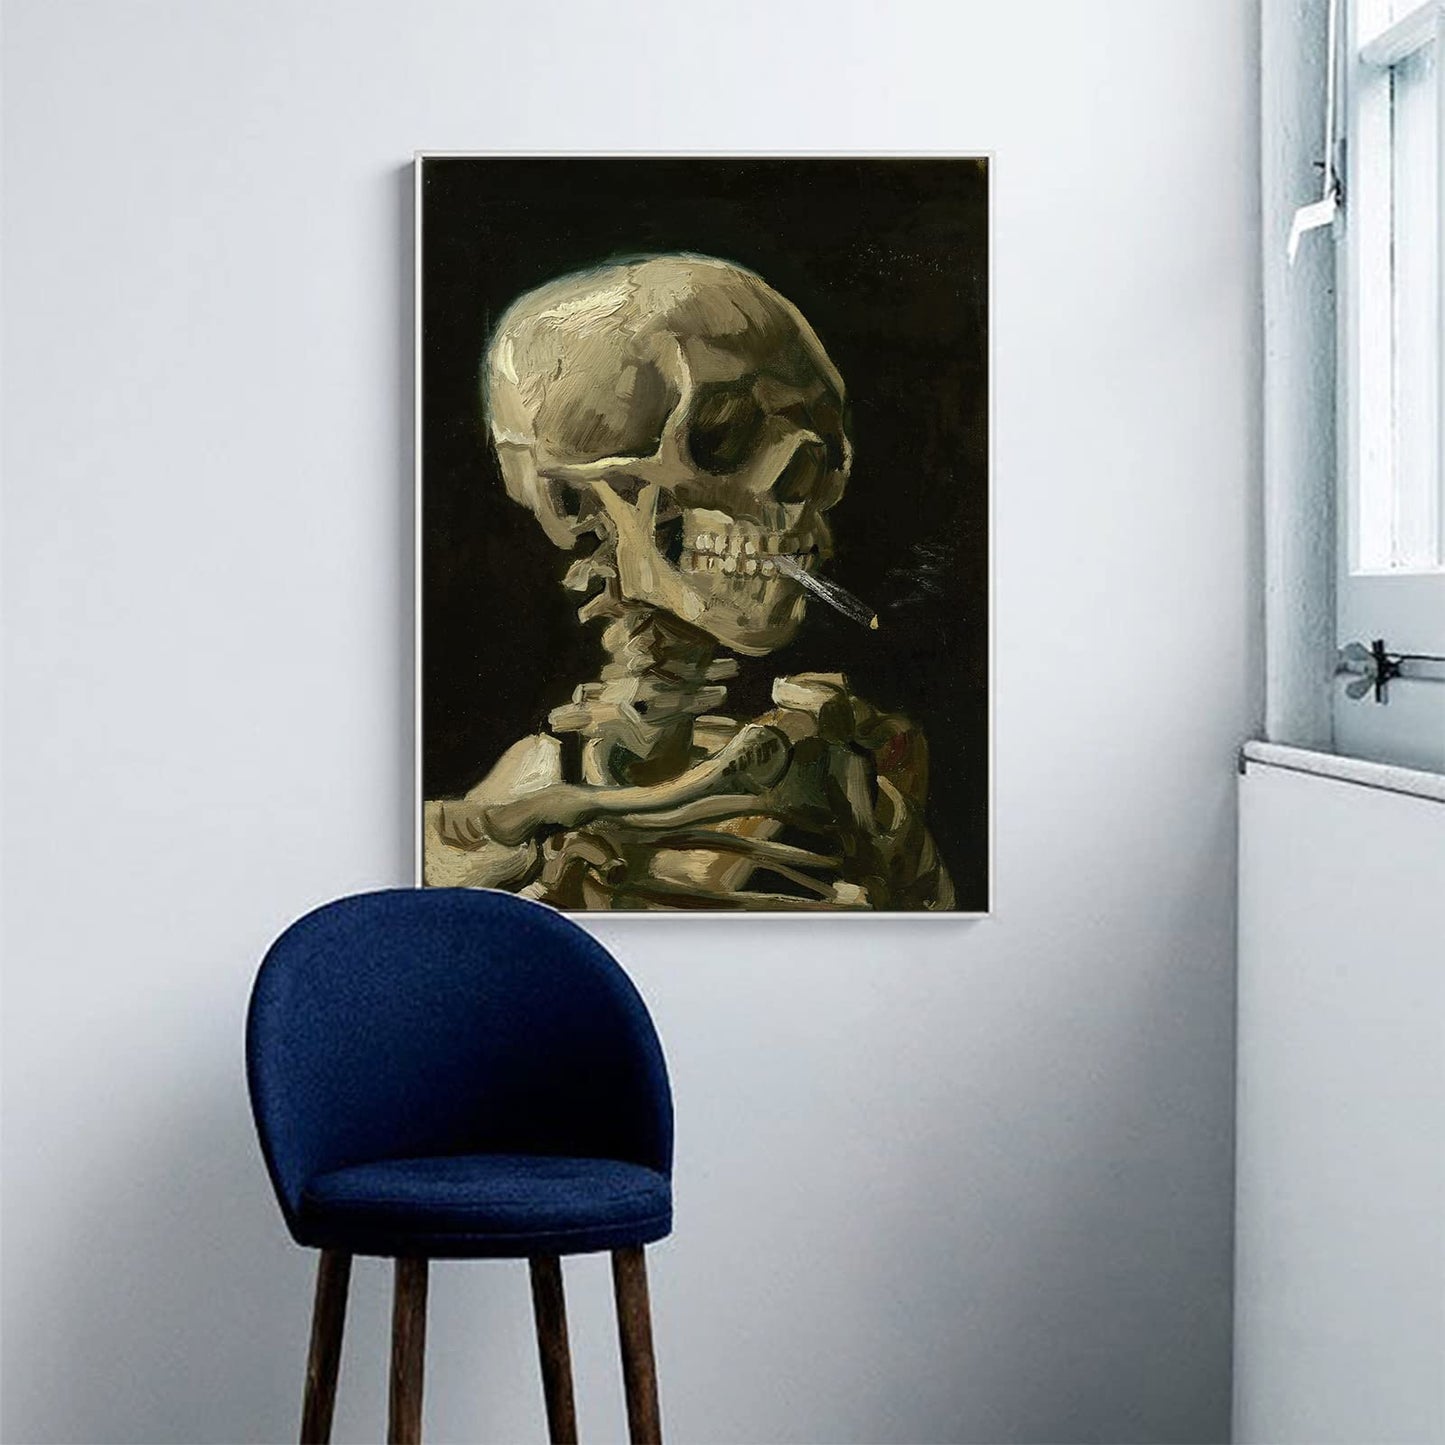 Vincent Van Gogh Skull Of a Skeleton With Burning Cigarette Art Prints Poster - Famous Painting Reproduction Van Gogh Skeleton Smoking Canvas Wall Art for Home Office Decor - Unique Gift(Skeleton